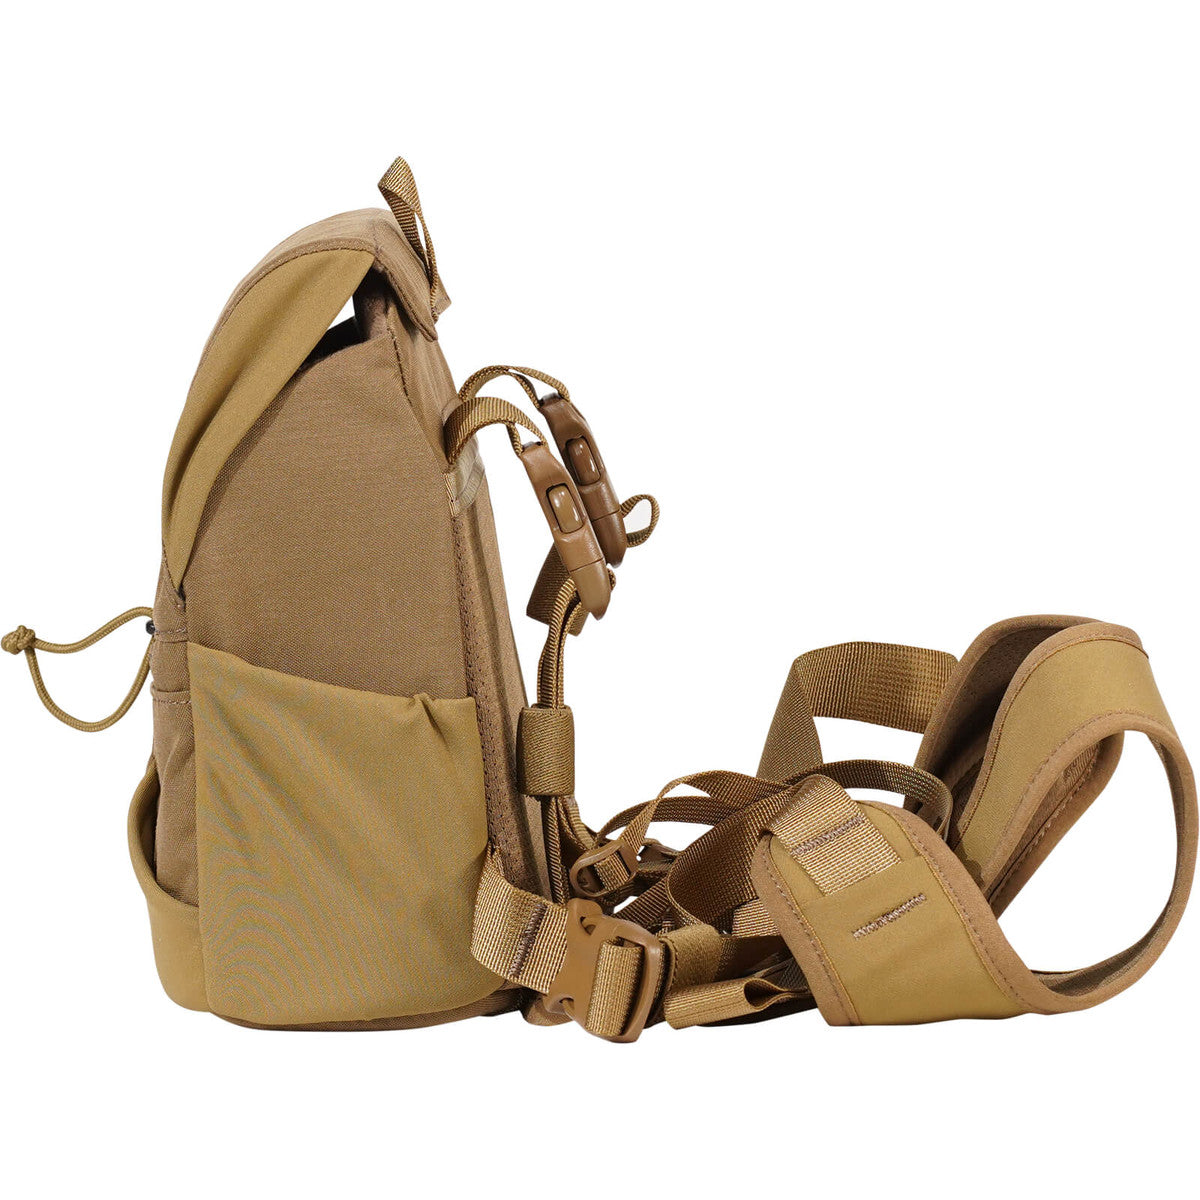 Mystery Ranch Bino Harness 10X - Coyote - XL -  - Mansfield Hunting & Fishing - Products to prepare for Corona Virus